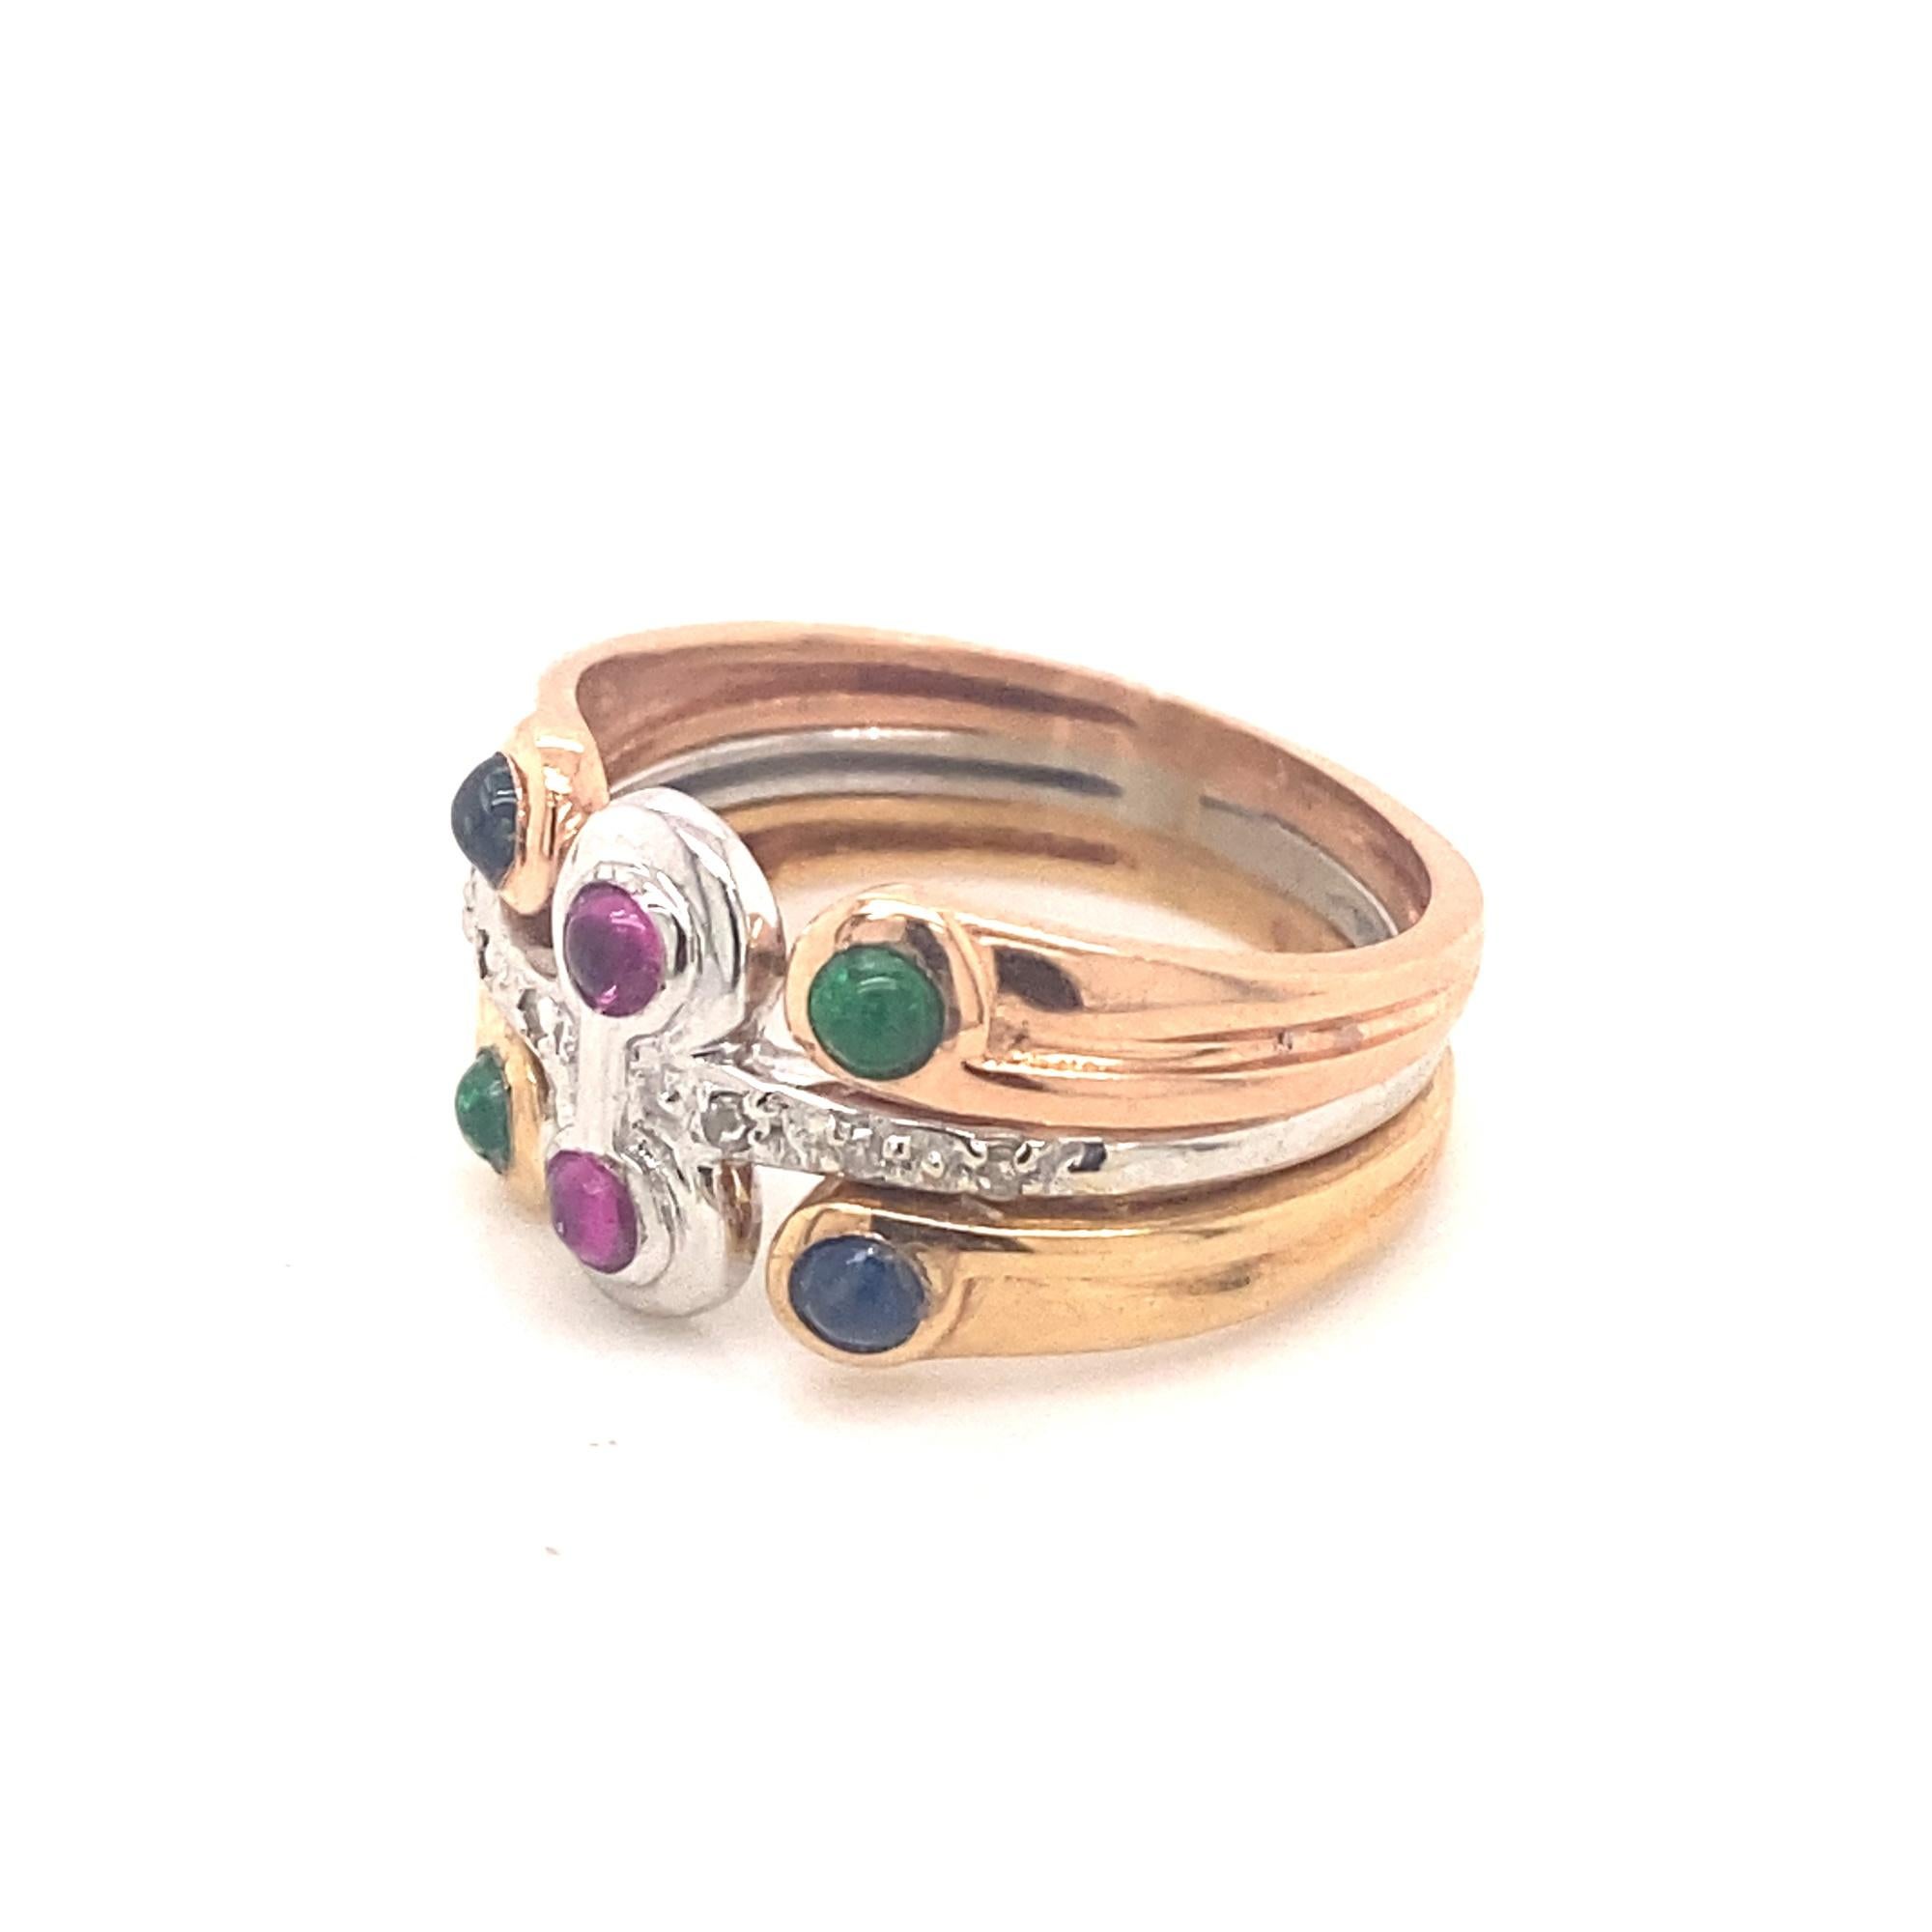 This is a beautiful vintage multi stone ring set with 2 cabochon rubies, emeralds and diamonds.  There are 6 diamonds set win white gold. The ring is marked 585 with a makers mark.  The stones are all natural with nice color and clarity.  The ring